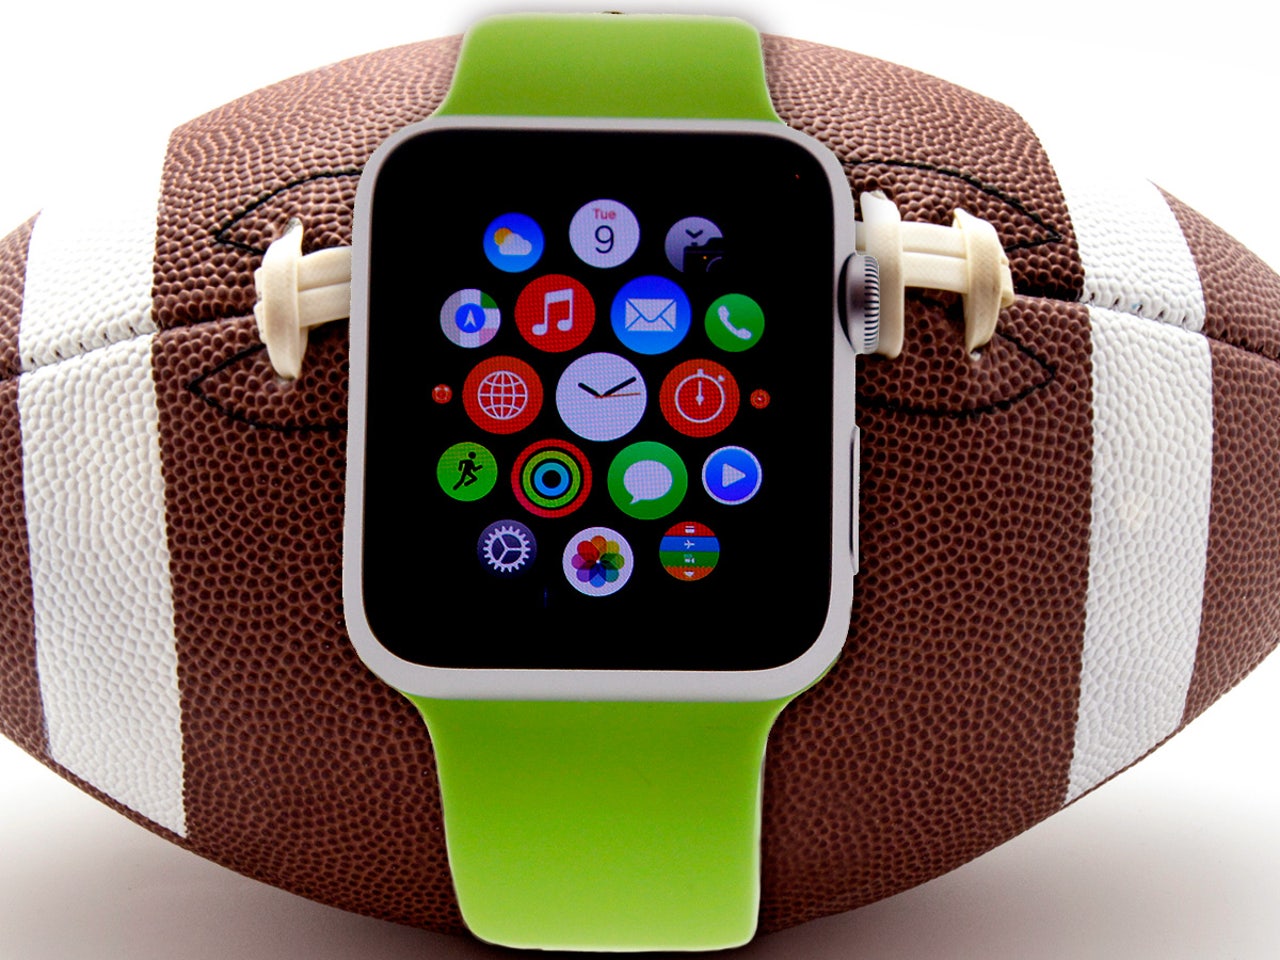 13 things sports fans will want to do with their Apple Watch FOX Sports